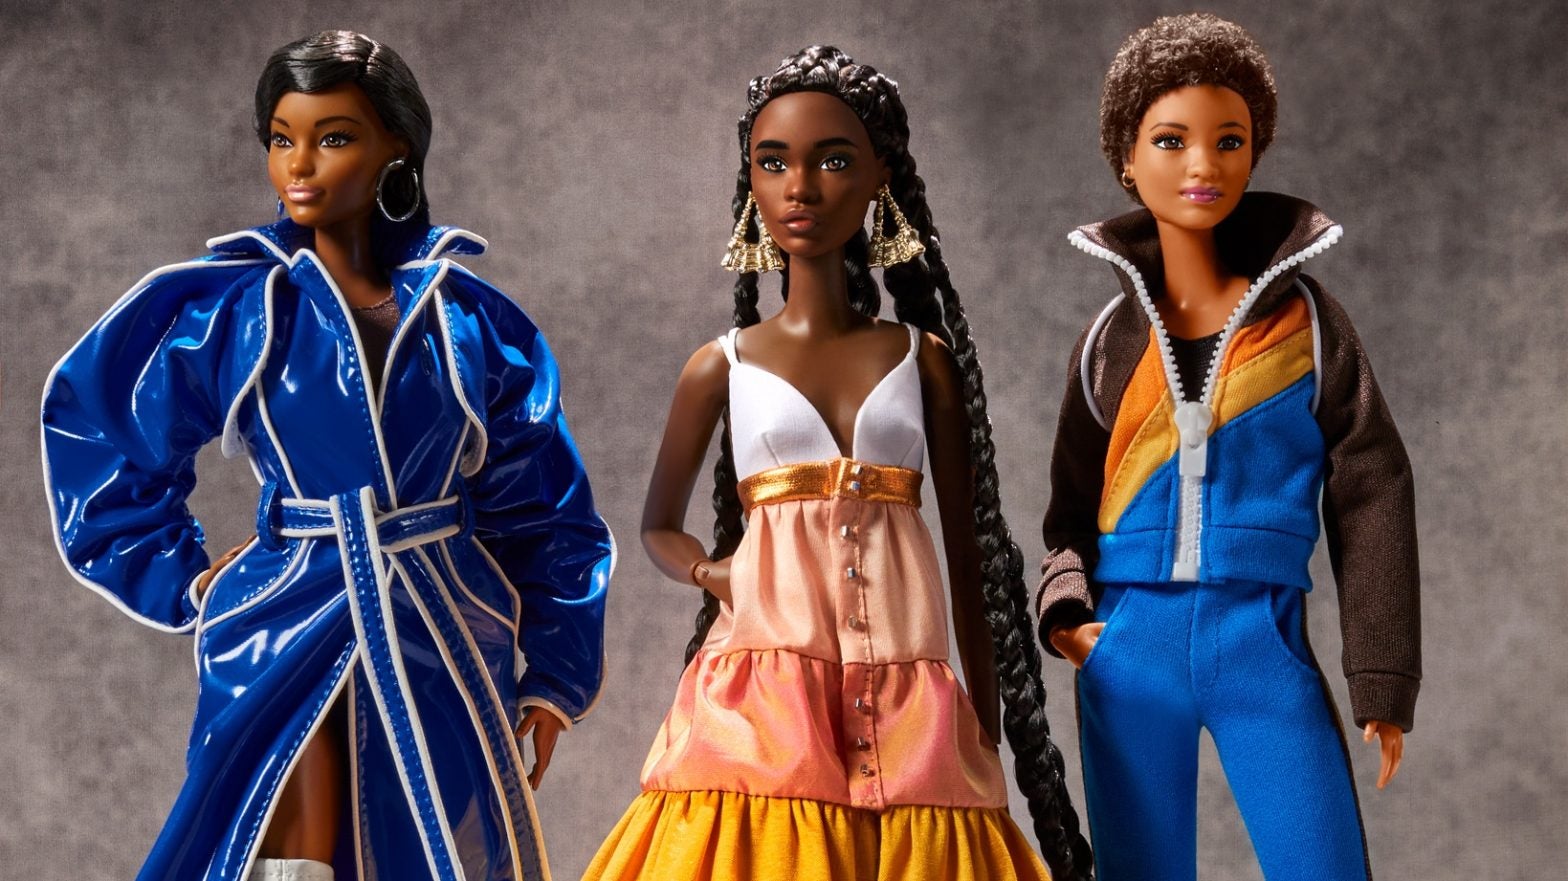 This Harlem's Fashion Row And Barbie Collab Is The Best Thing We've Seen All Day